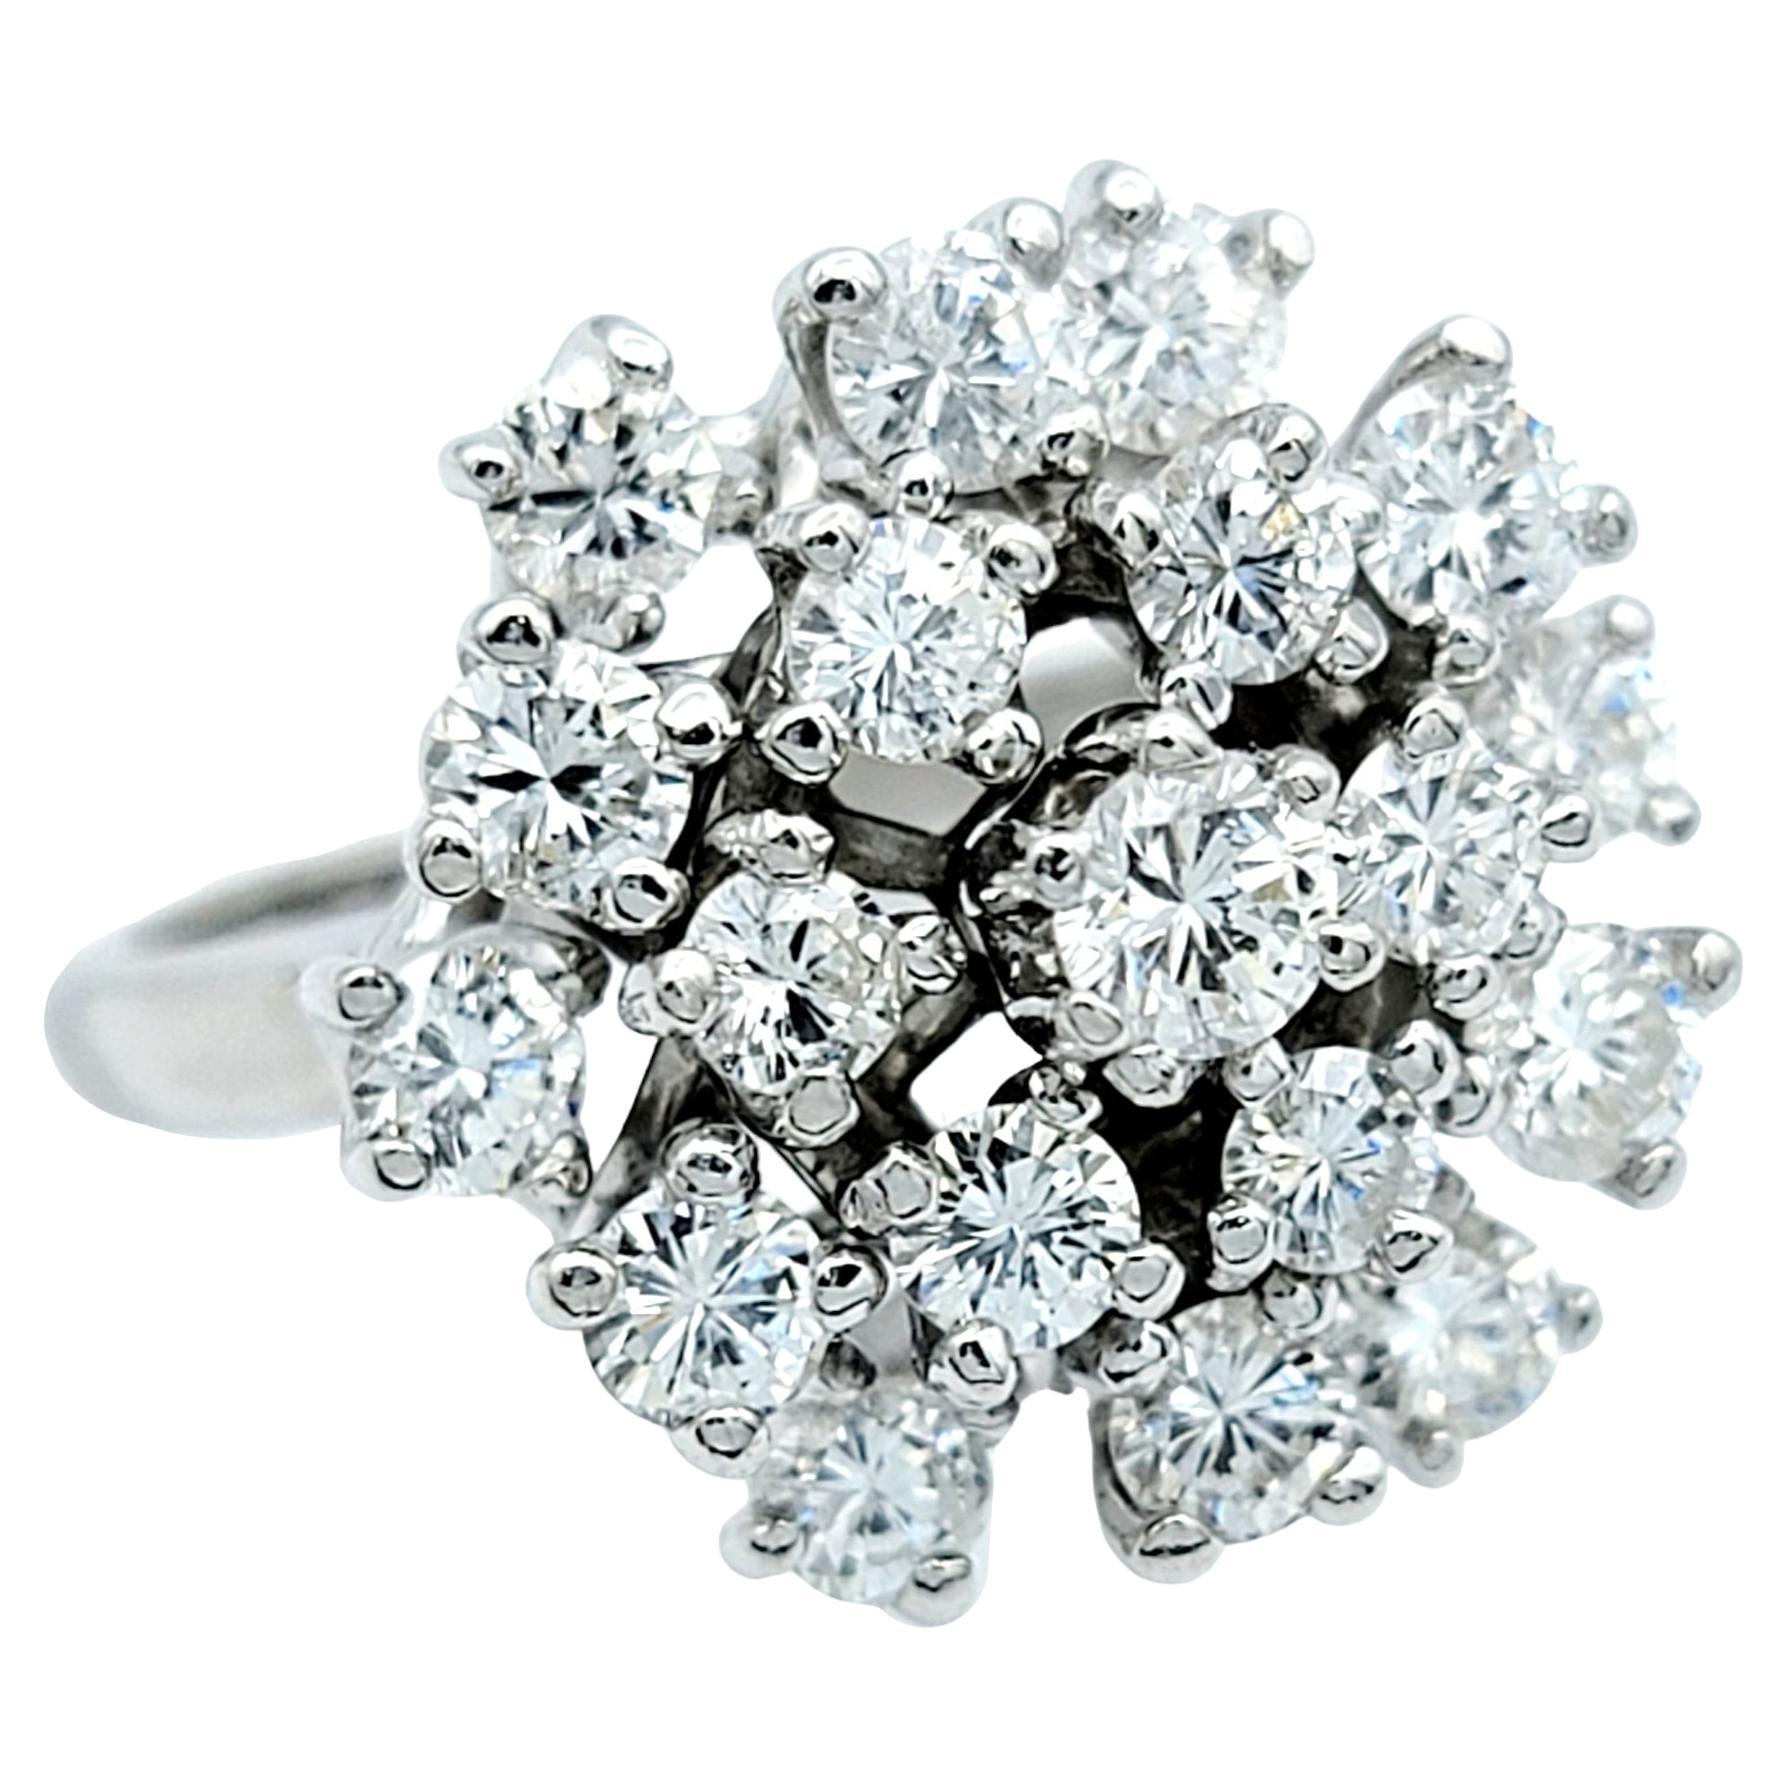 Ring size: 5.75

Introducing our exquisite diamond dome cluster ring set in luxurious polished white gold. This dazzling piece of jewelry is the epitome of elegance and sophistication, perfect for adding a touch of glamour to any occasion.

Crafted